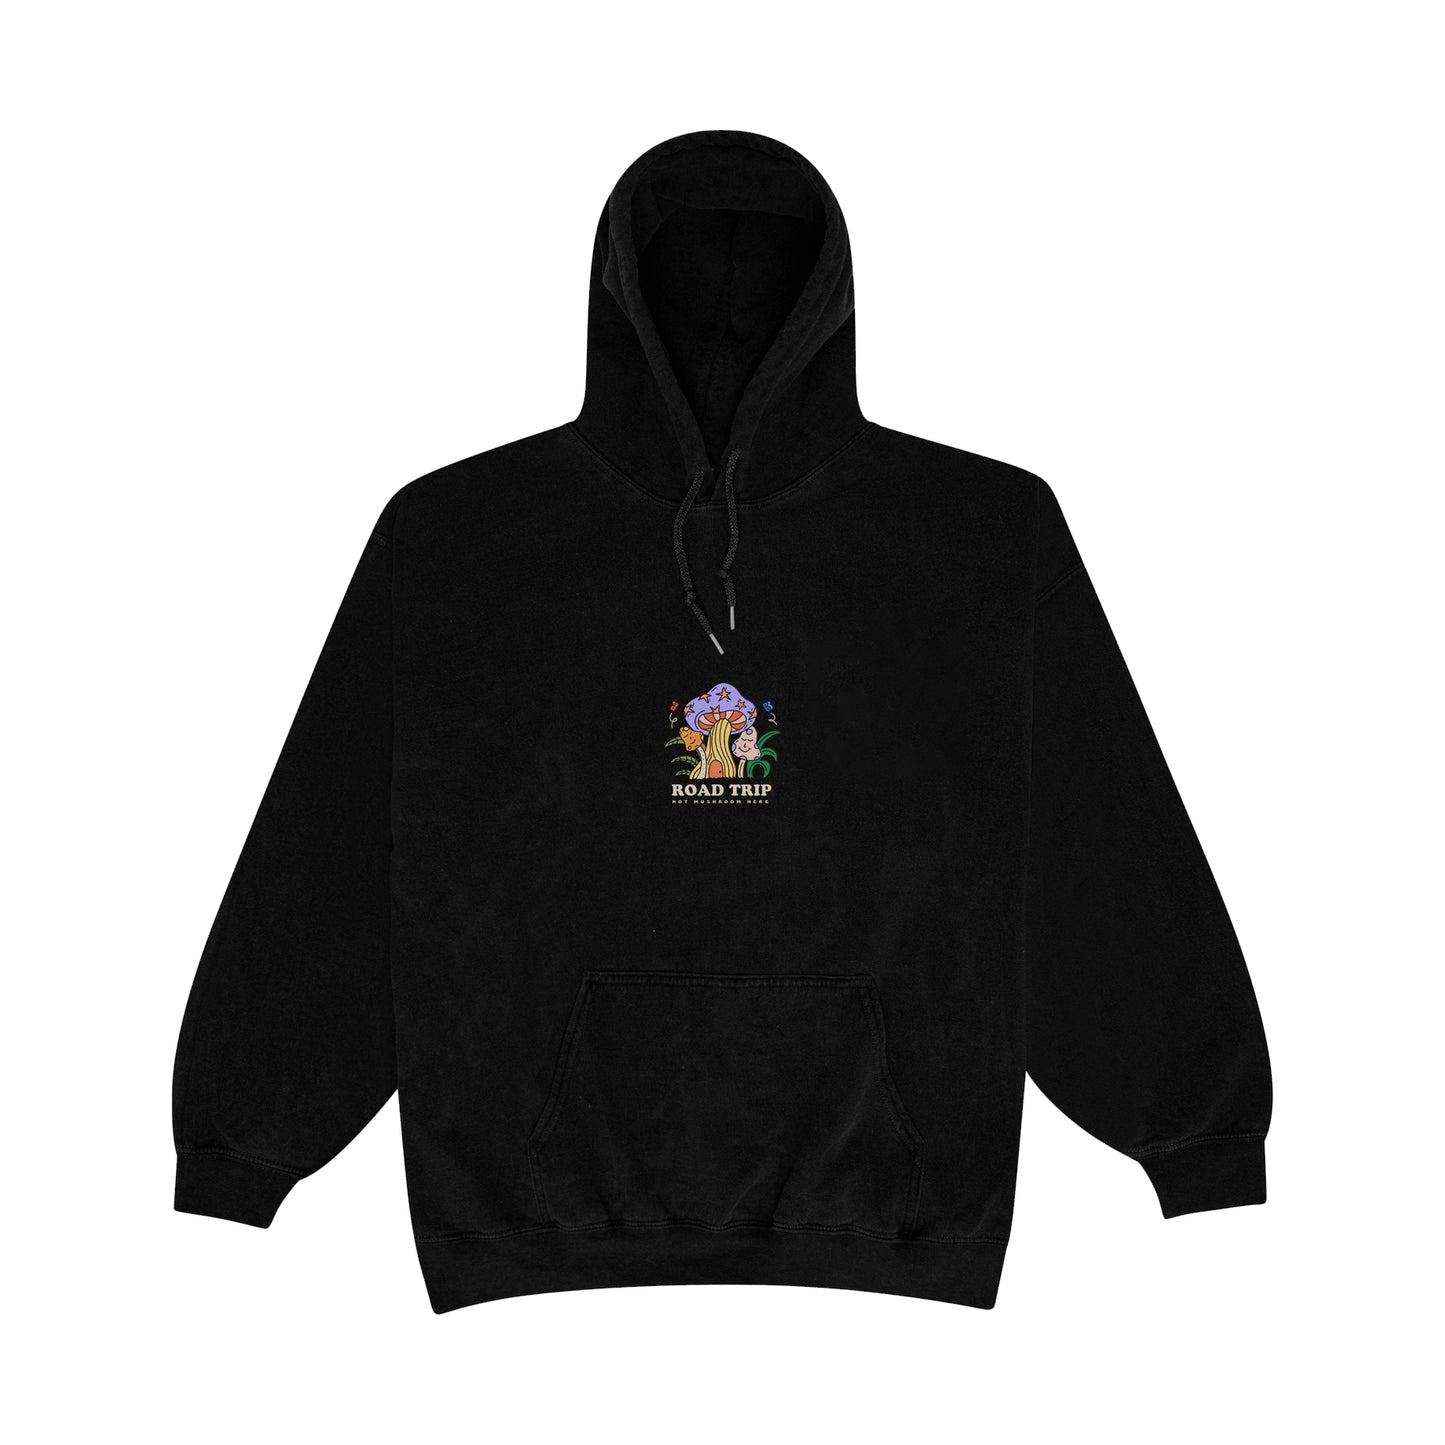 Other Side Store 'Road Trip' Embroidered Hoodie - Black / Sand